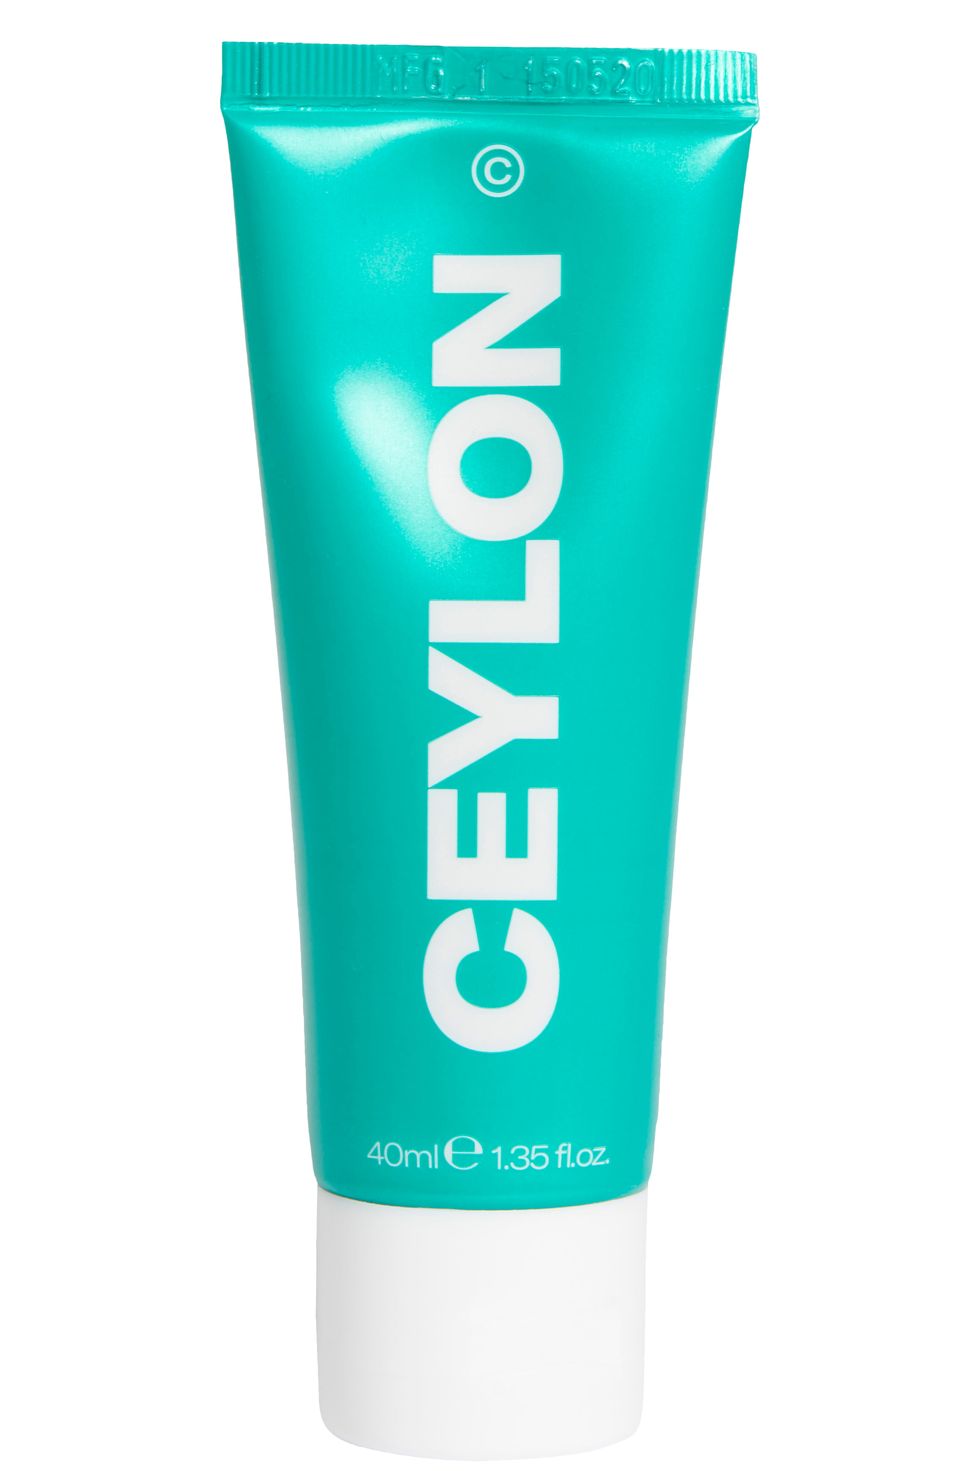 Bephies Beauty Supply Ceylon Facial Moisturizer (Nordstrom Exclusive)